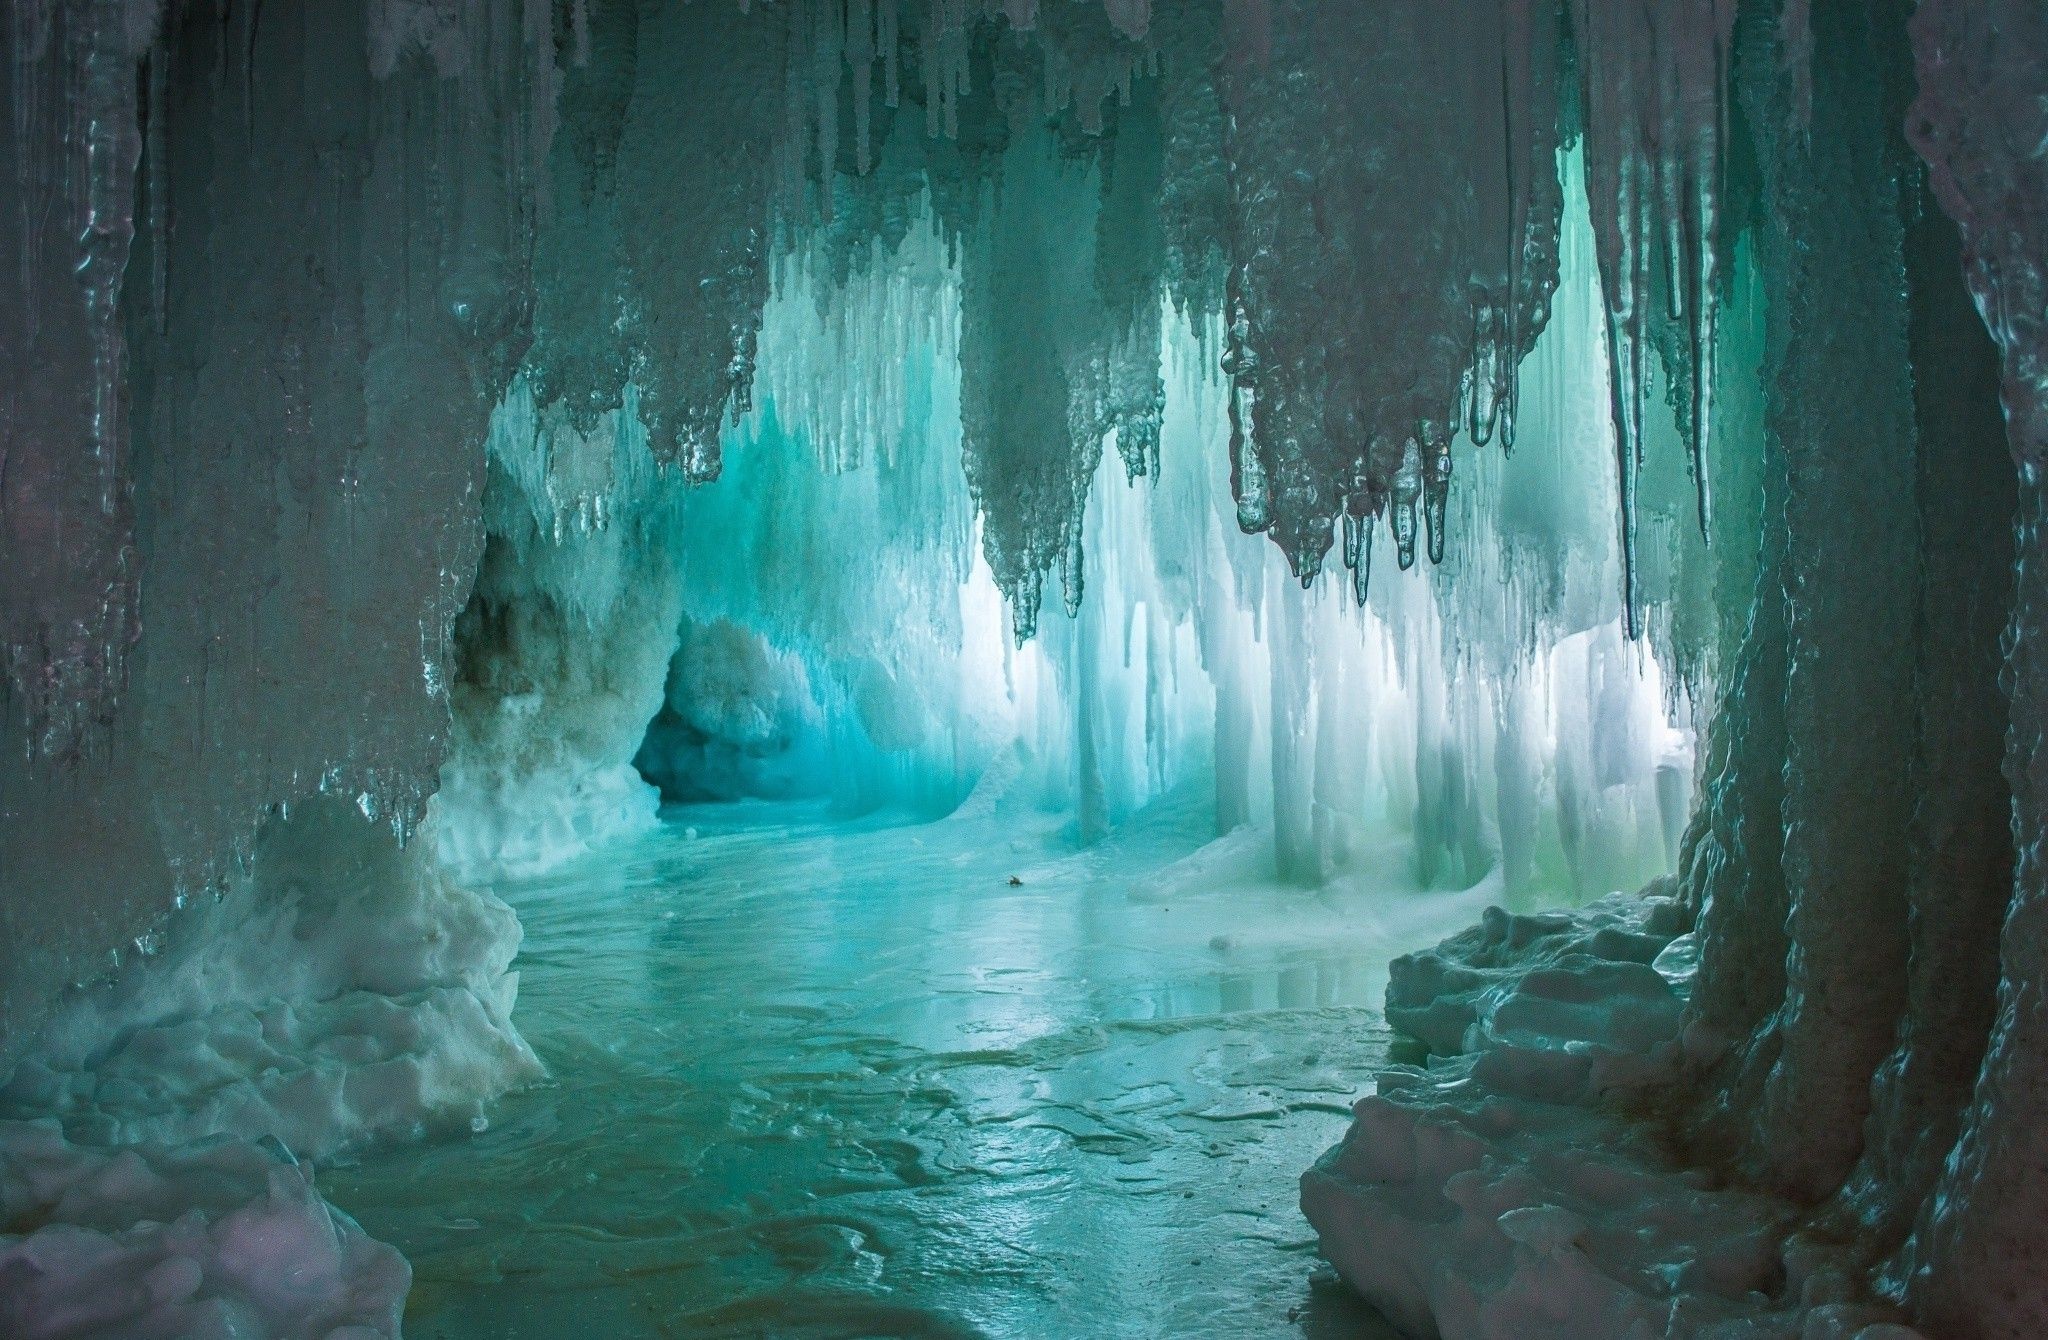 Captivating ice caves, Desktop wallpaper inspiration, Zoey Sellers collection, 2050x1340 HD Desktop